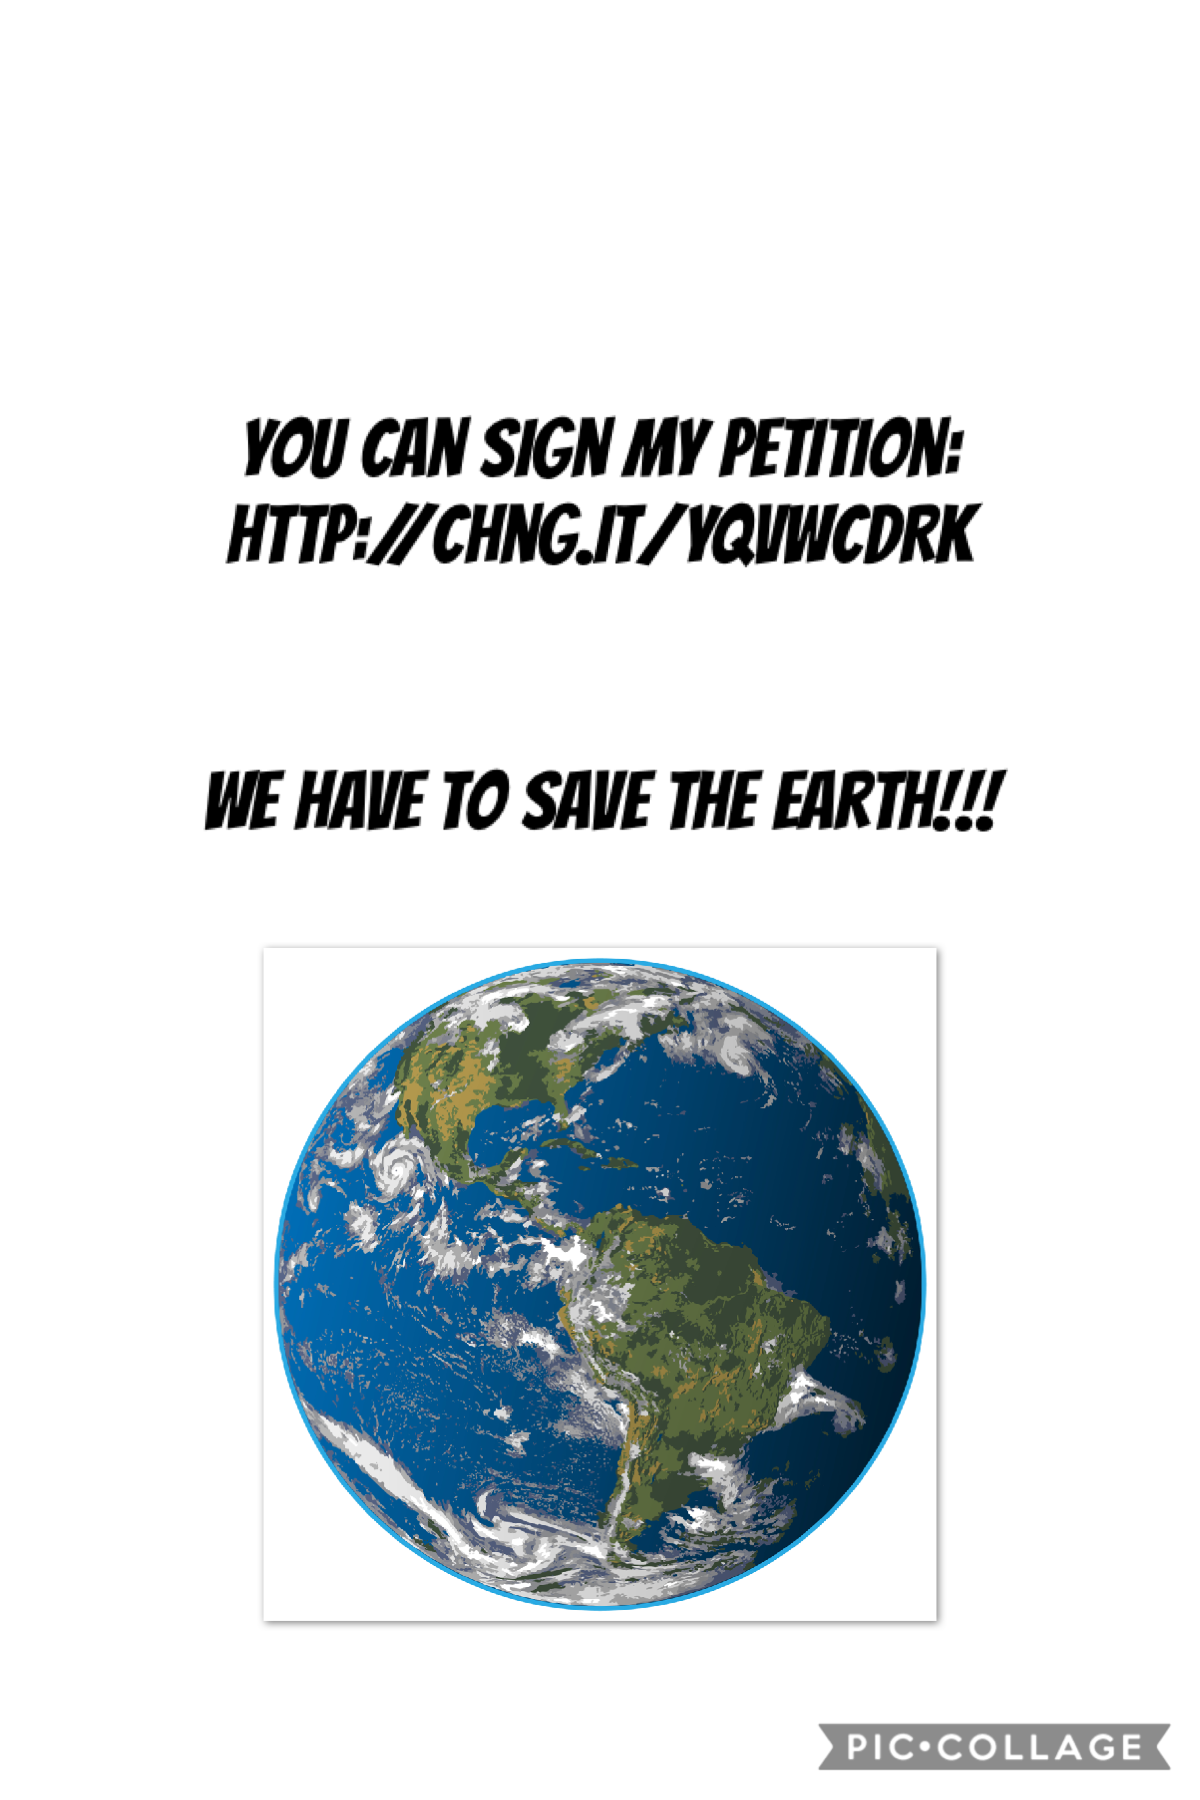 Tap 
http://chng.it/YqvWcDRK
Sign petition to stop burning forest!
Save the earth